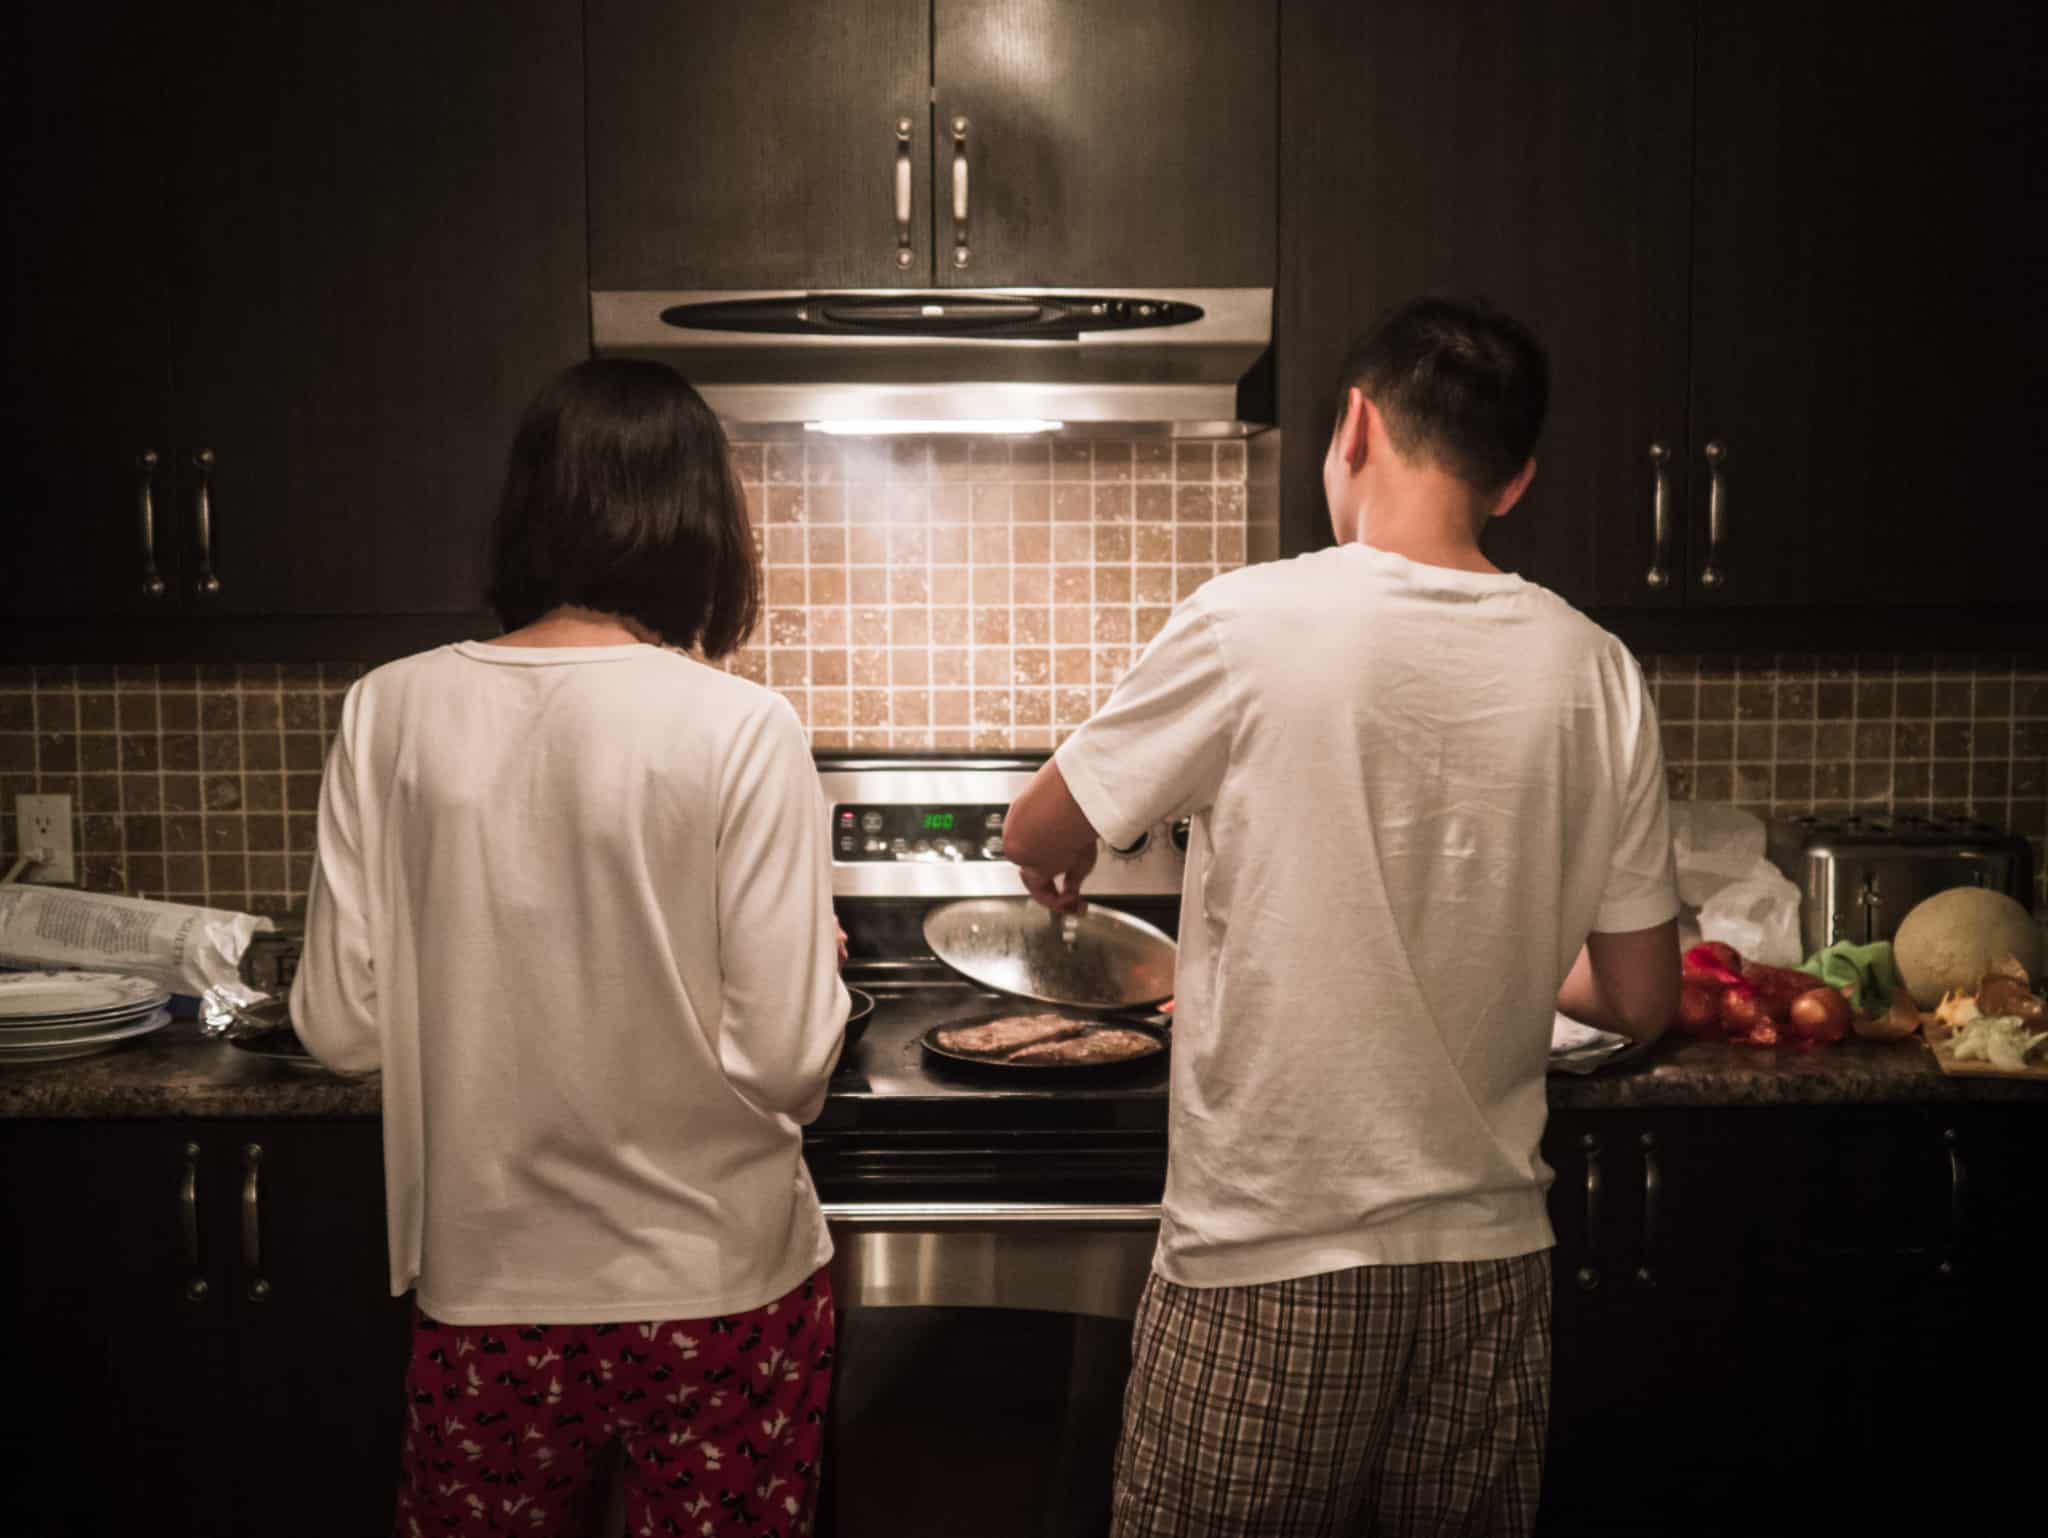 young couple cooking, enjoying appliances with electricity and gas that are now suffering increases